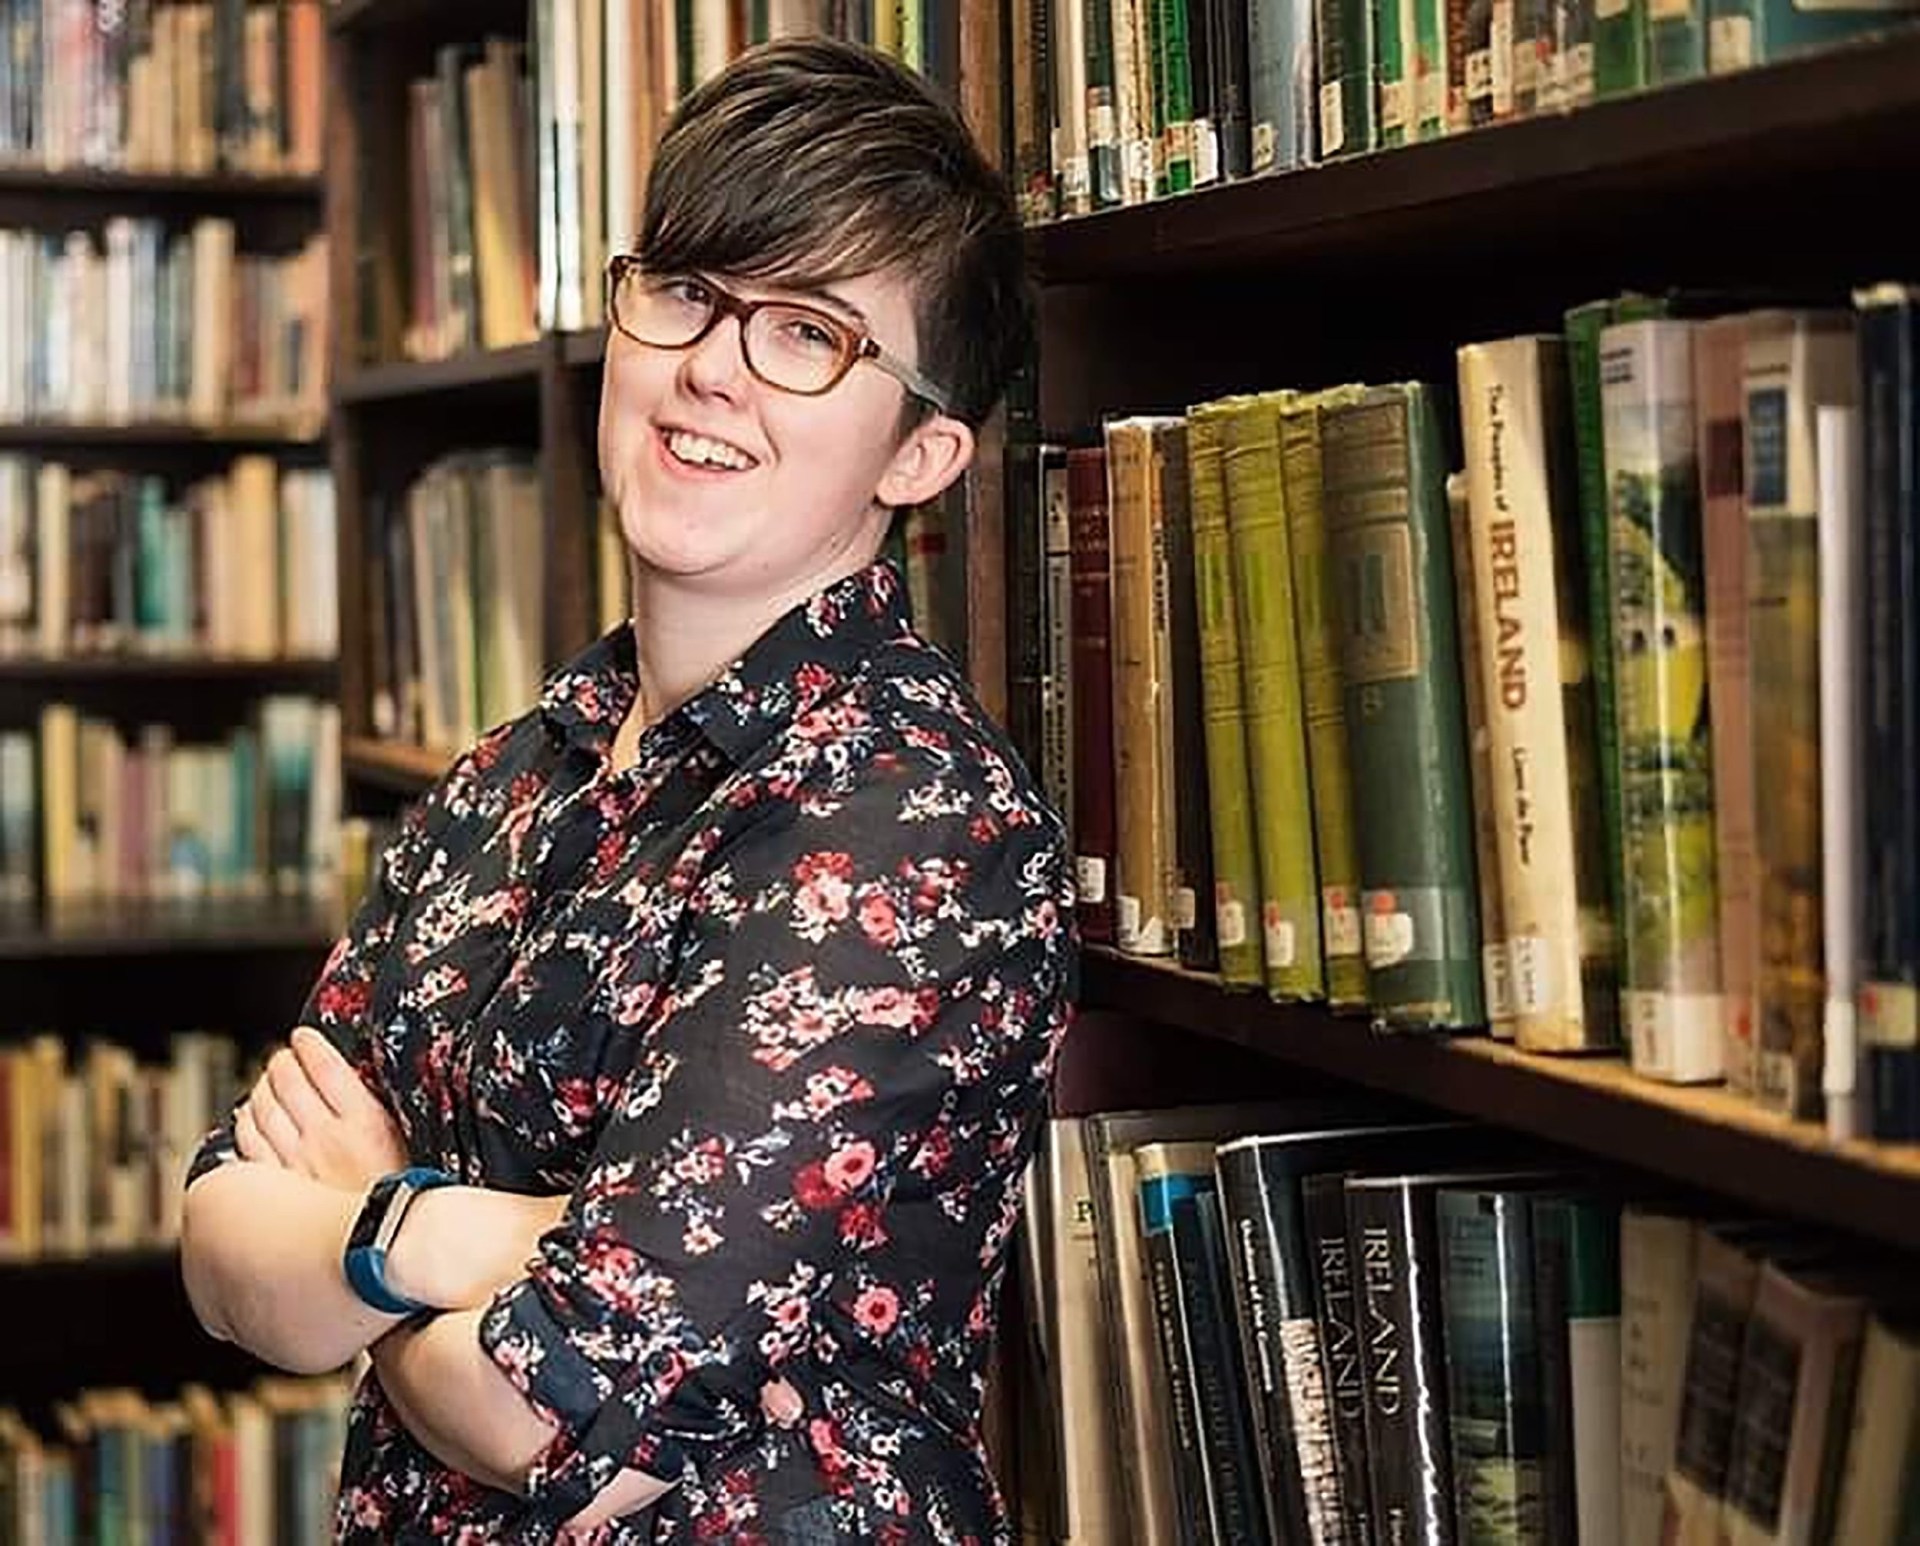 hope doesn't last long where lyra mckee was murdered